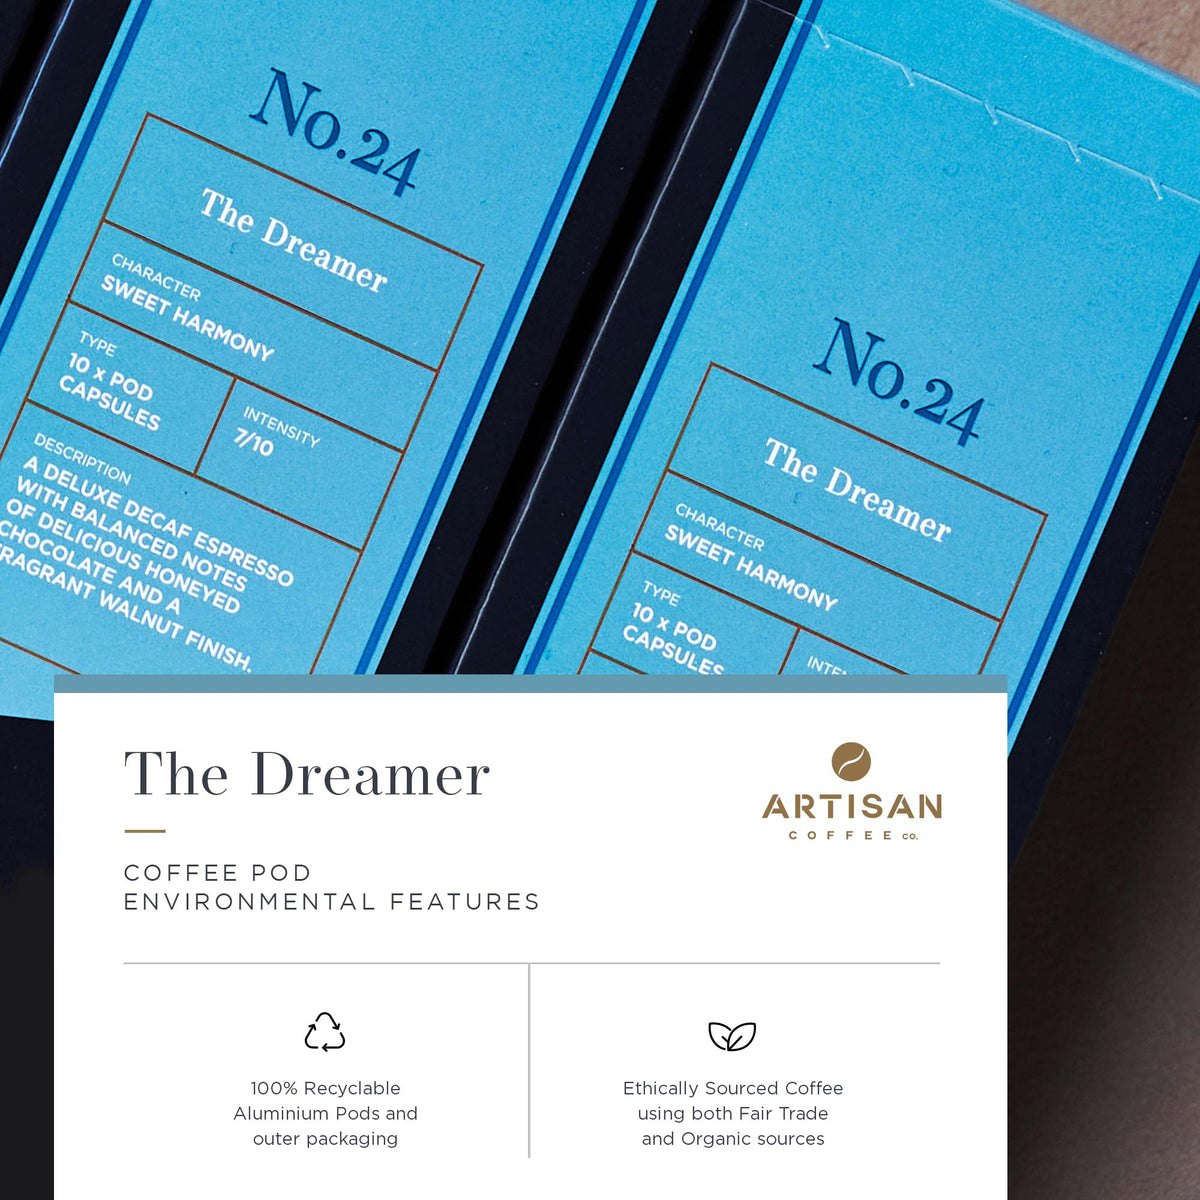 Artisan Coffee Co The Dreamer Pods Infographic Environmental features